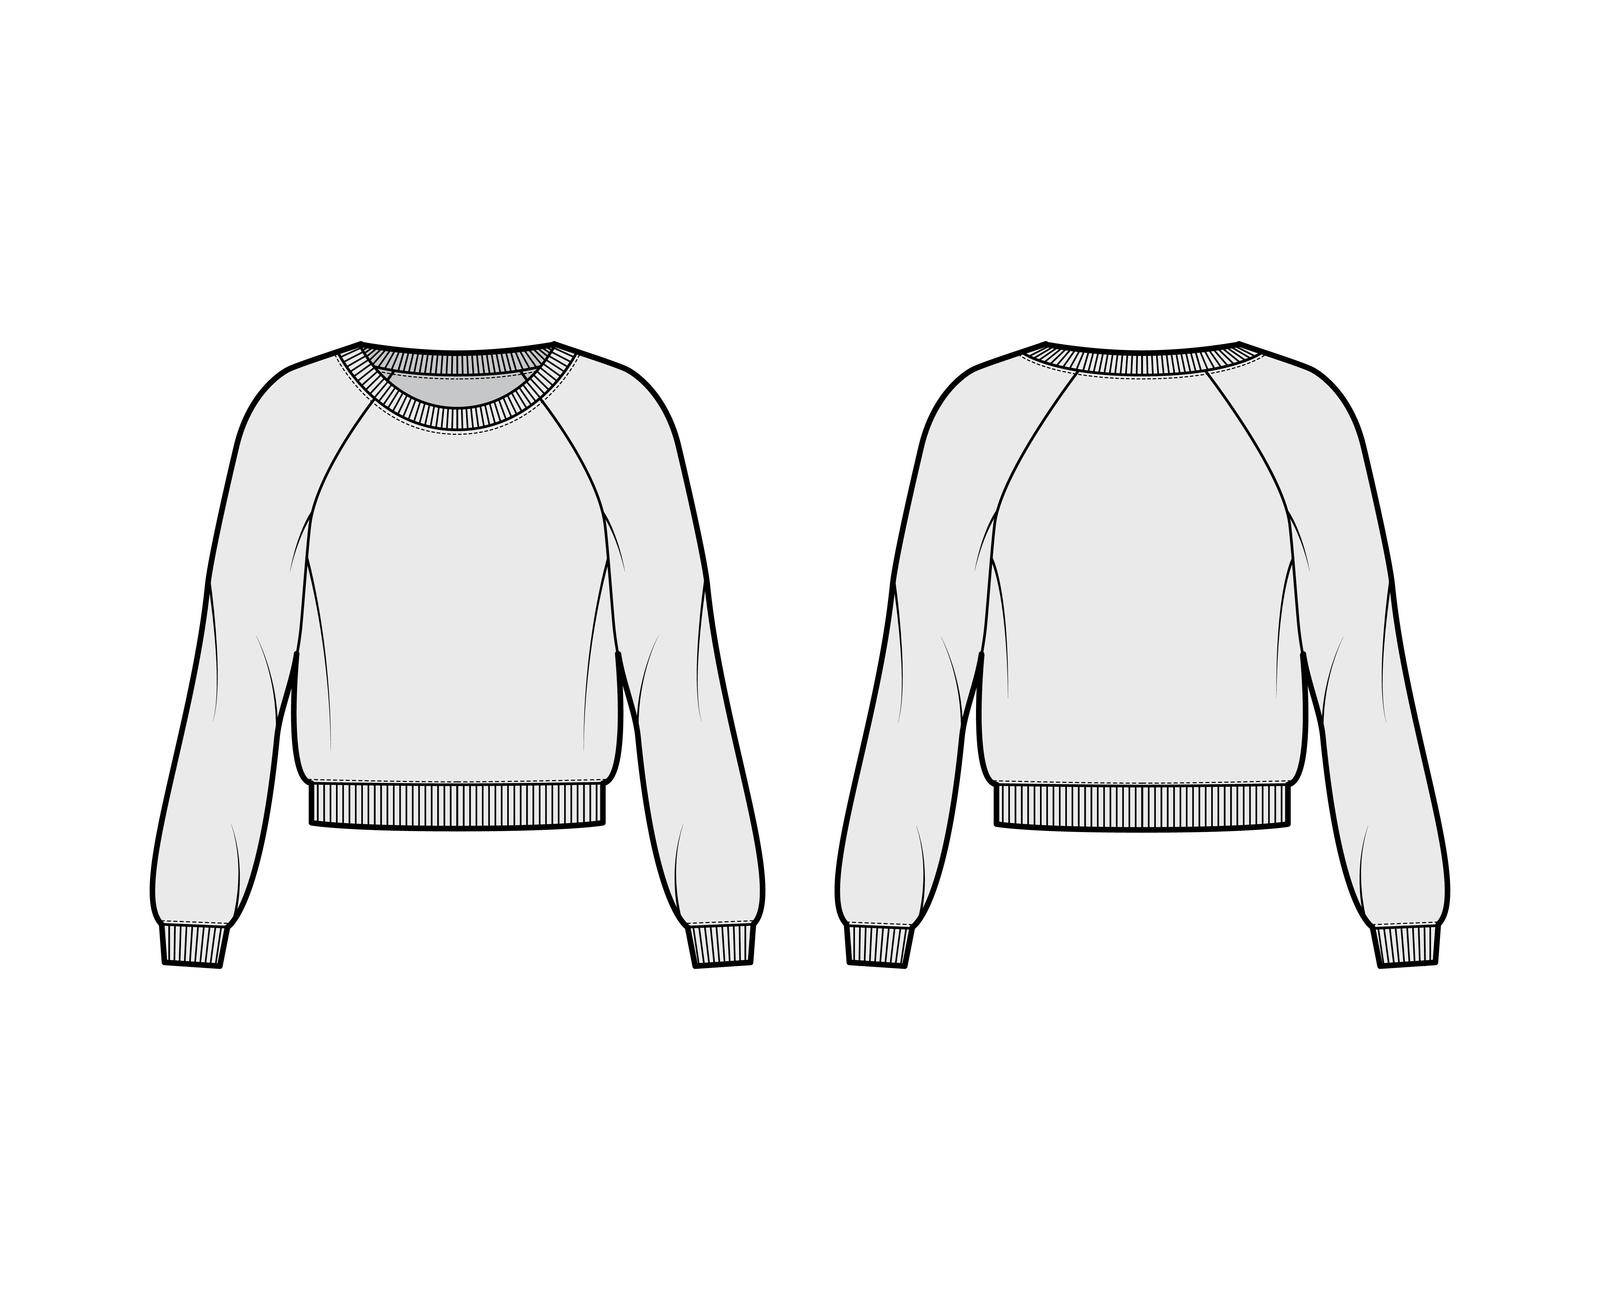 Cotton-terry sweatshirt technical fashion illustration with relaxed fit, scoop neckline, long raglan sleeves, ribbed trims. Flat jumper apparel template front back grey color. Women men unisex top CAD